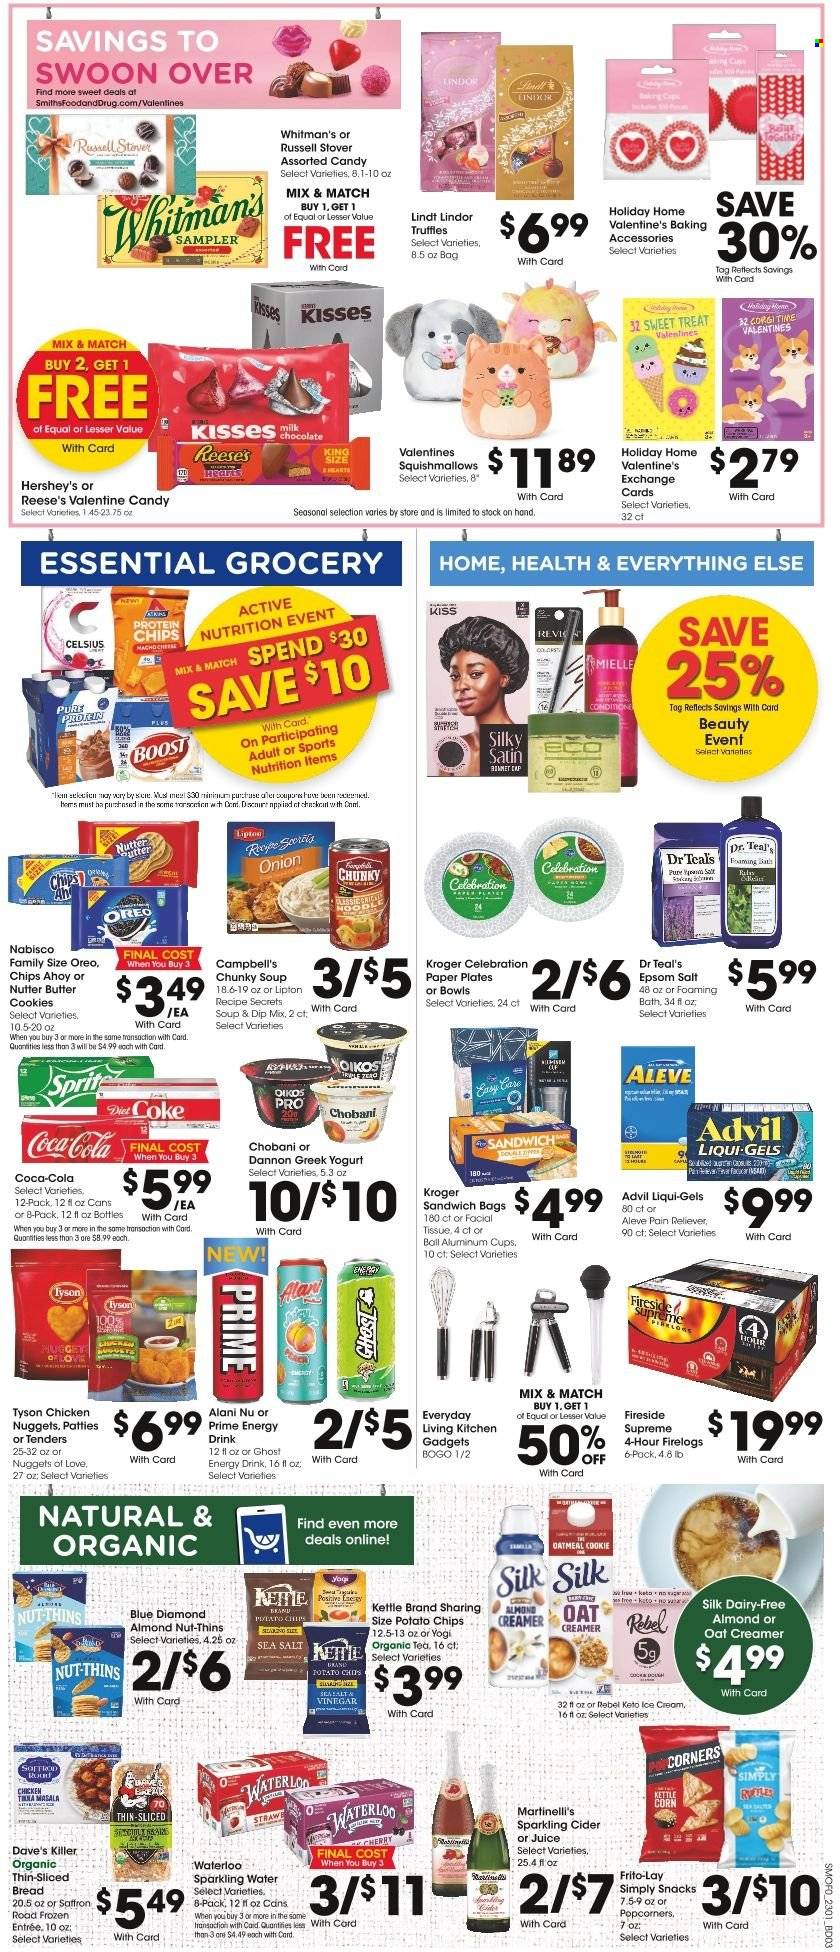 thumbnail - Smith's Flyer - 02/01/2023 - 02/07/2023 - Sales products - bread, cherries, Campbell's, soup, nuggets, chicken nuggets, greek yoghurt, Oreo, yoghurt, Oikos, Chobani, Dannon, organic milk, Silk, creamer, almond creamer, ice cream, Reese's, Hershey's, Enlightened lce Cream, cookies, butter cookies, snack, Lindt, Lindor, truffles, Celebration, potato chips, Thins, popcorn, Frito-Lay, Blue Diamond, Coca-Cola, Sprite, juice, energy drink, Lipton, Diet Coke, sparkling water, Boost, tea, sparkling cider, sparkling wine, cider, tissues, Mielle, plate, baking accessories, cup, straw, paper, paper plate, Aleve, Advil Rapid. Page 5.